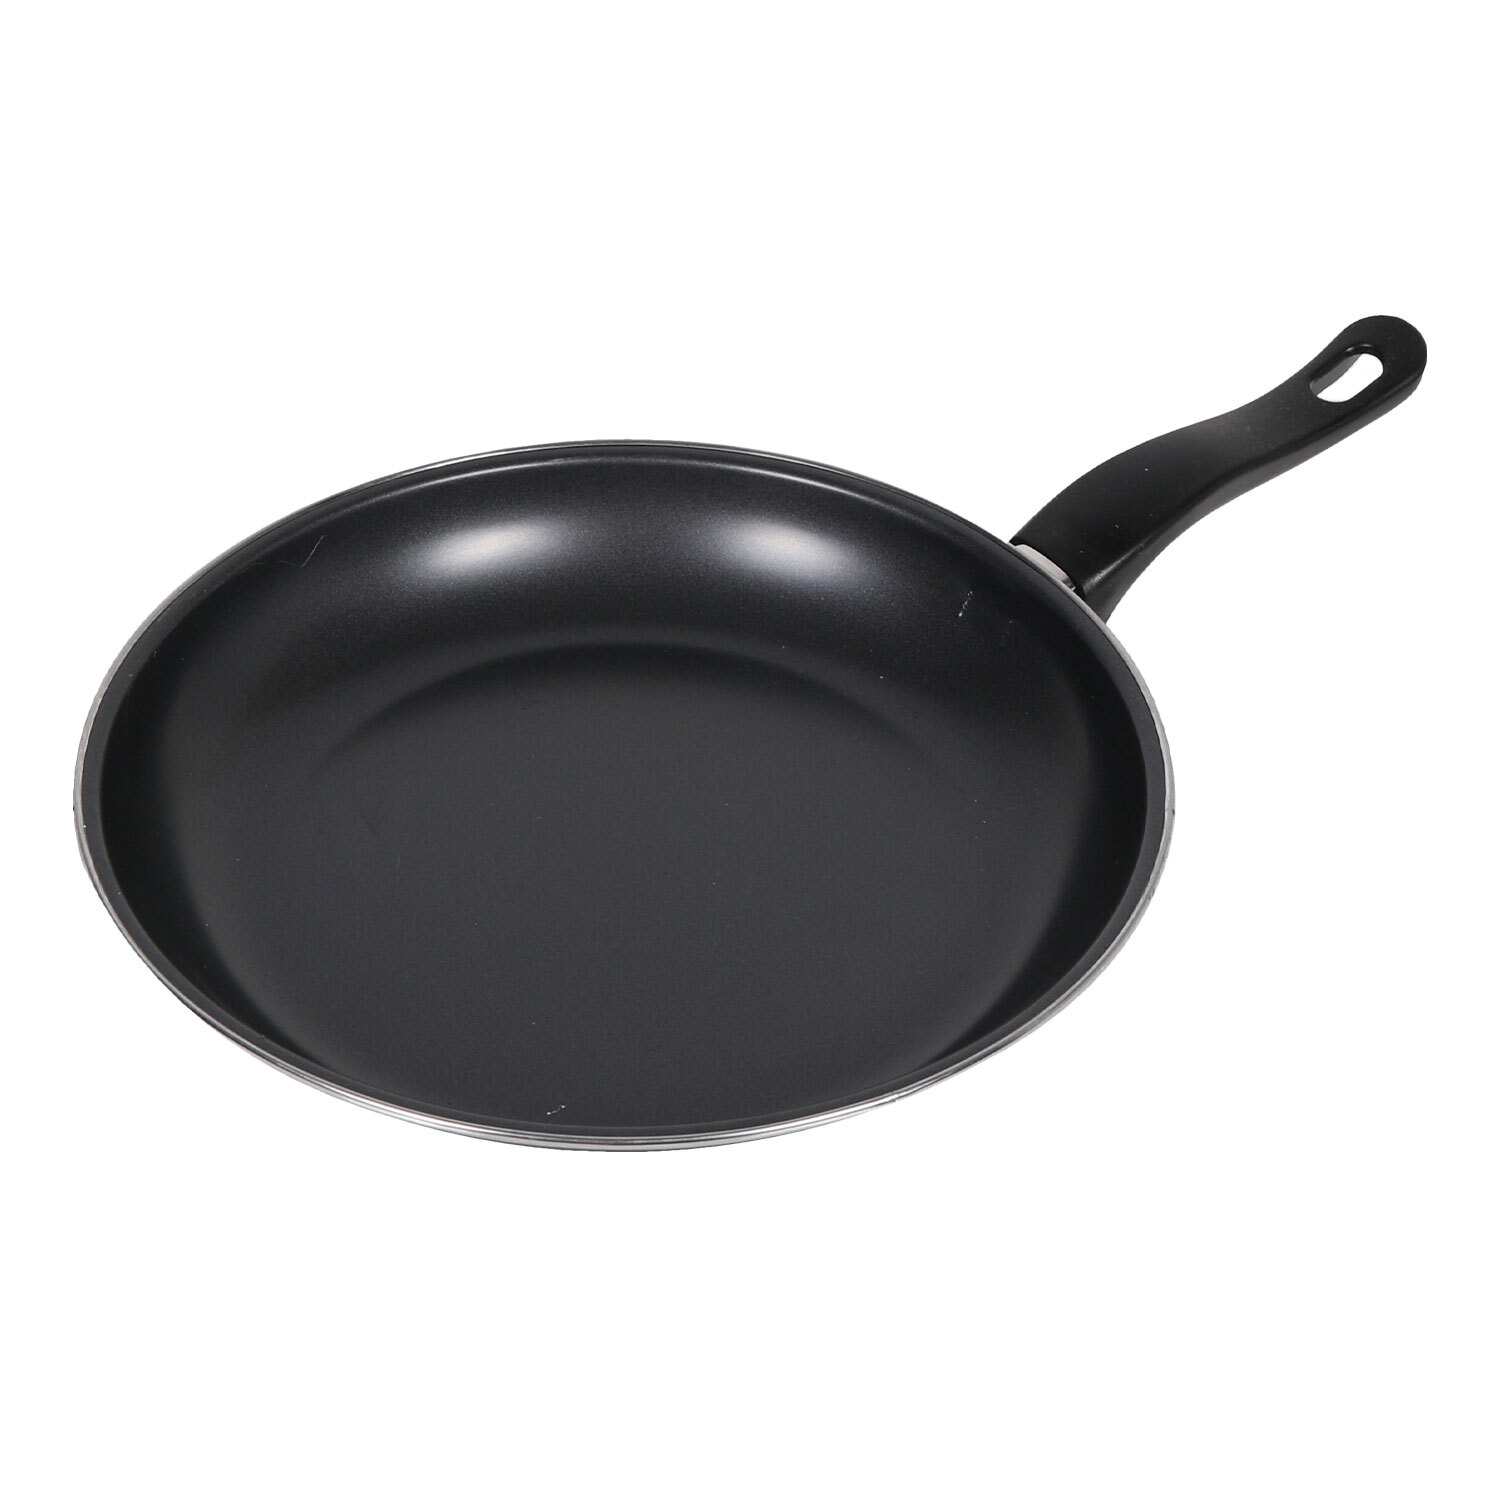 MY Frying Pans 2 Pack Image 2